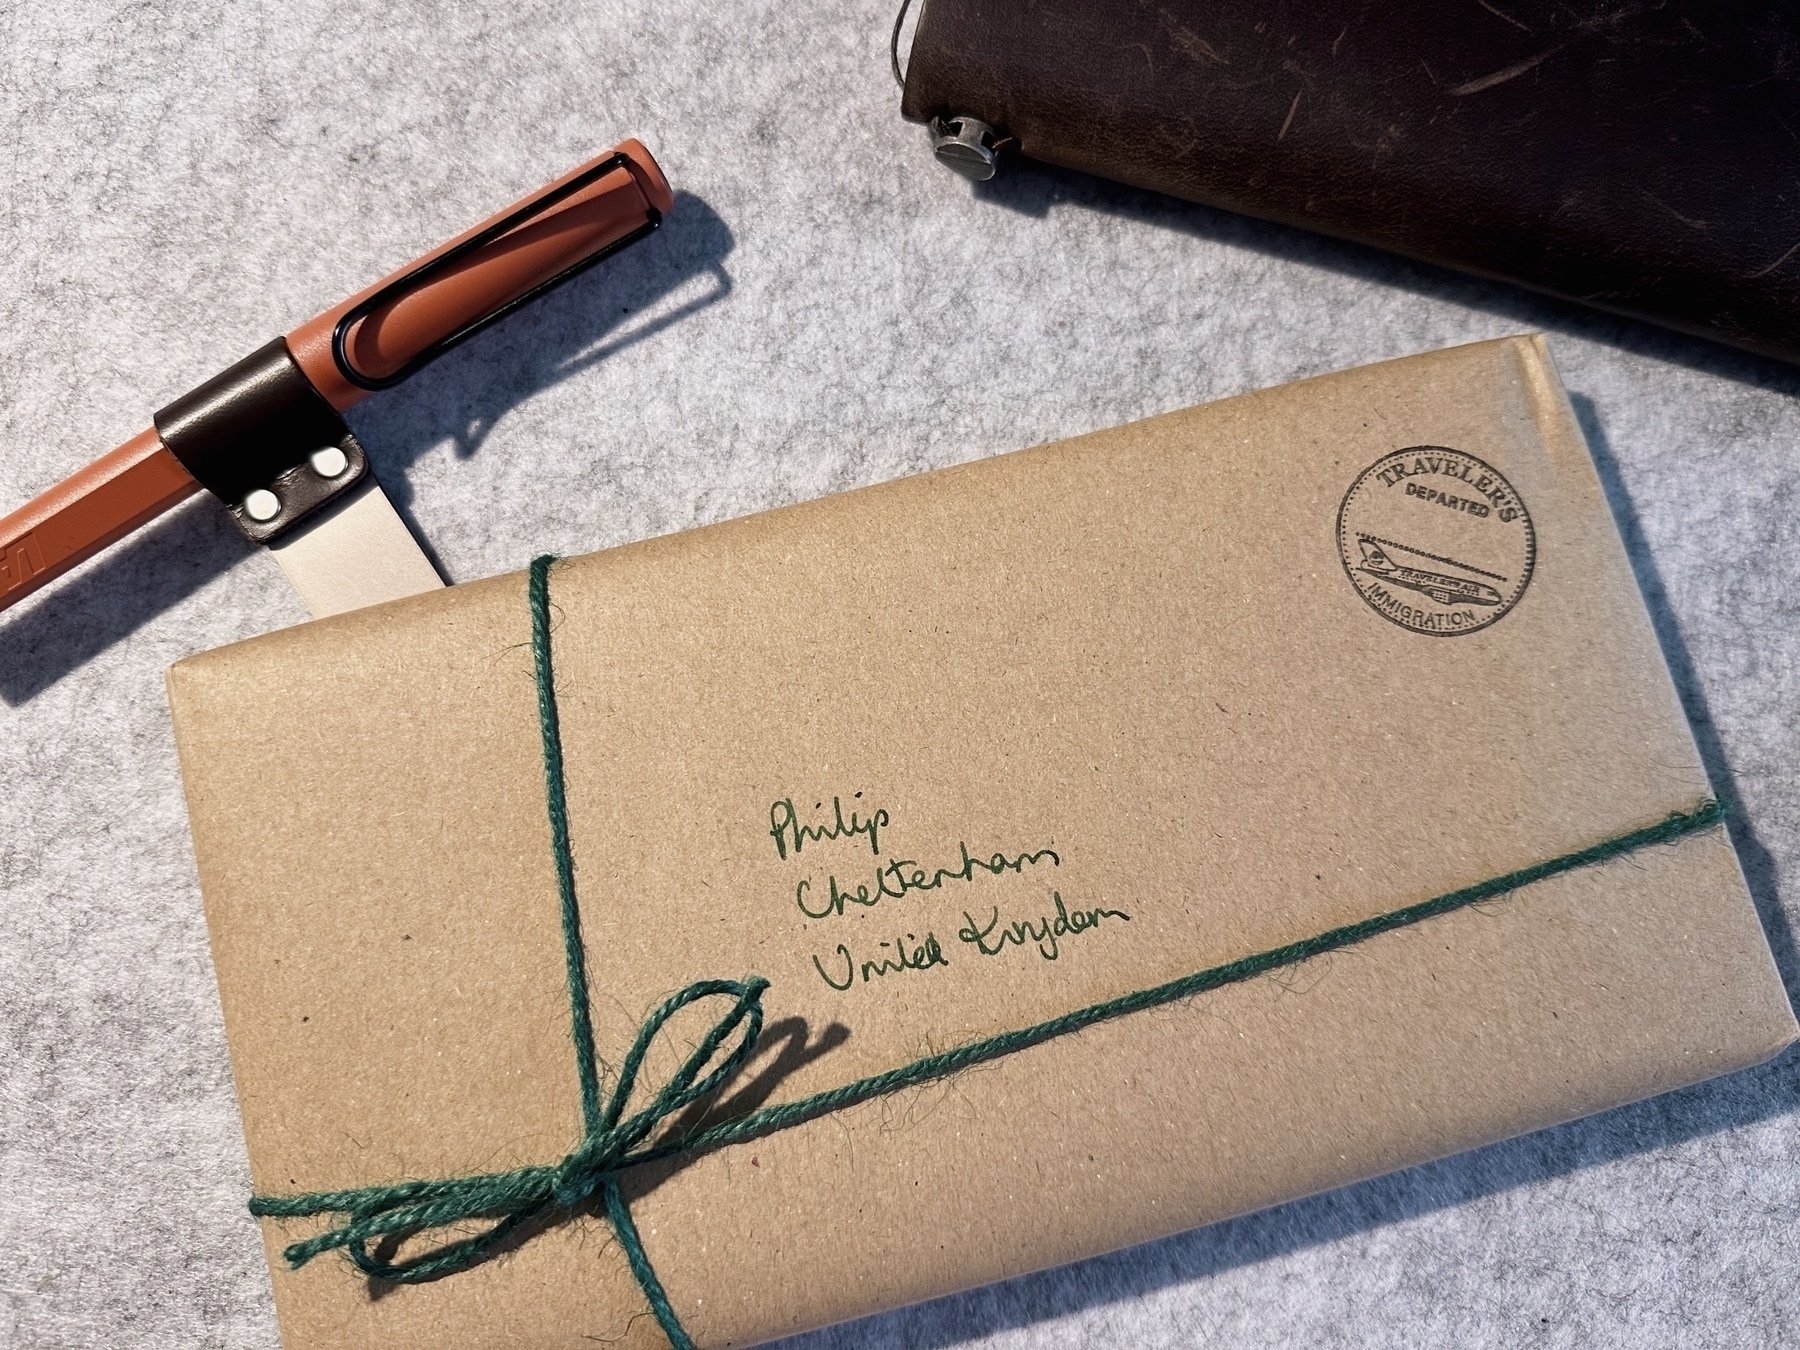 A package wrapped in brown paper with green string sits on a felt desk mat next to a brown travellers notebook and an orange pen in a leather pen loop.